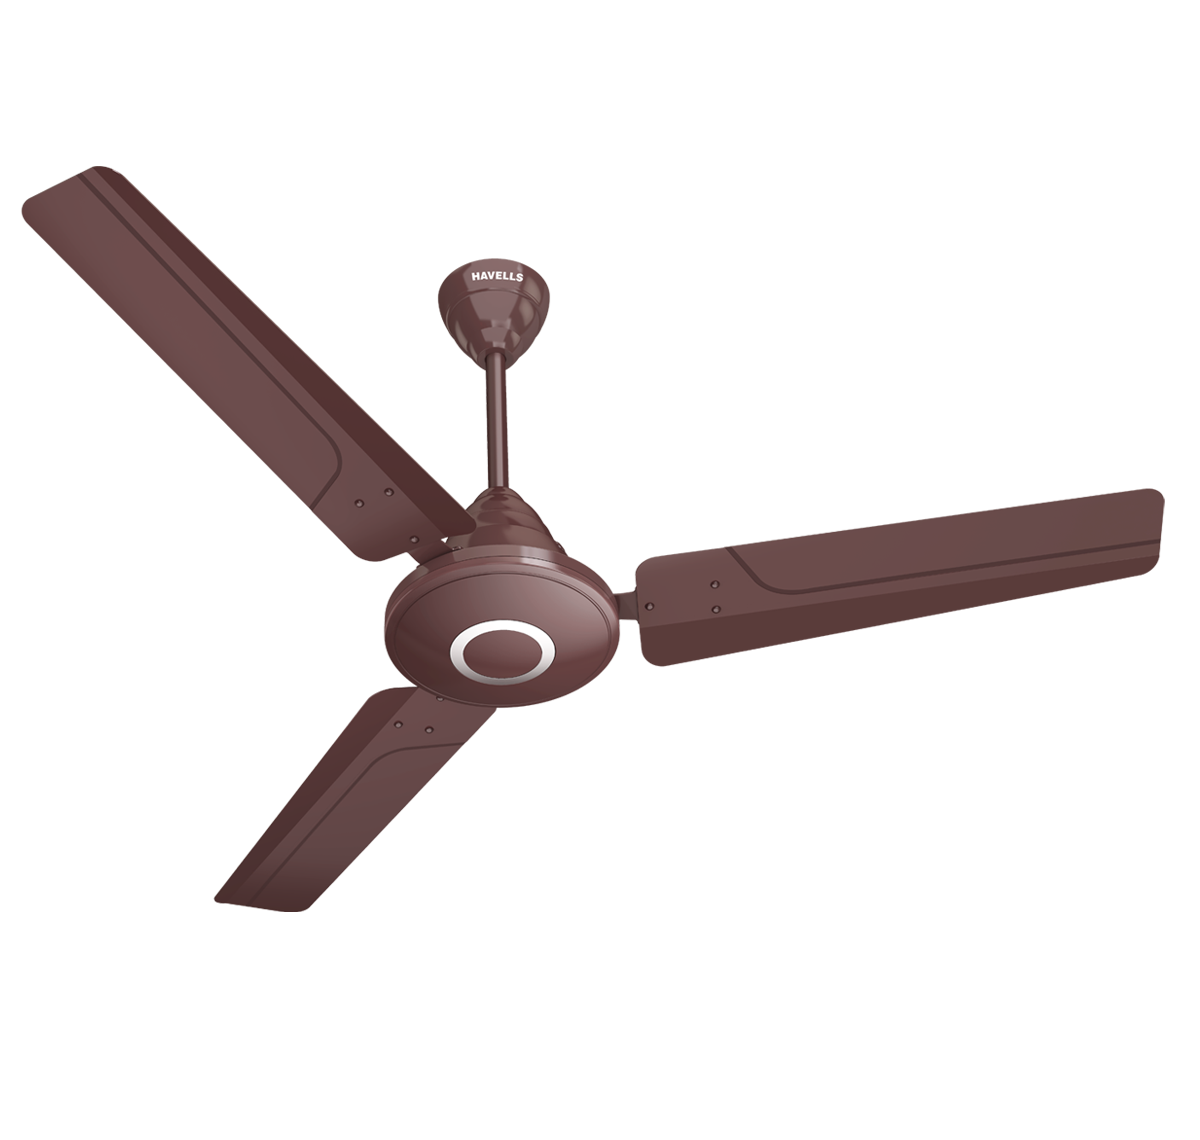 Havells Efficiencia Neo Energy Saving, Which Ceiling Fan Is Best For Home In India